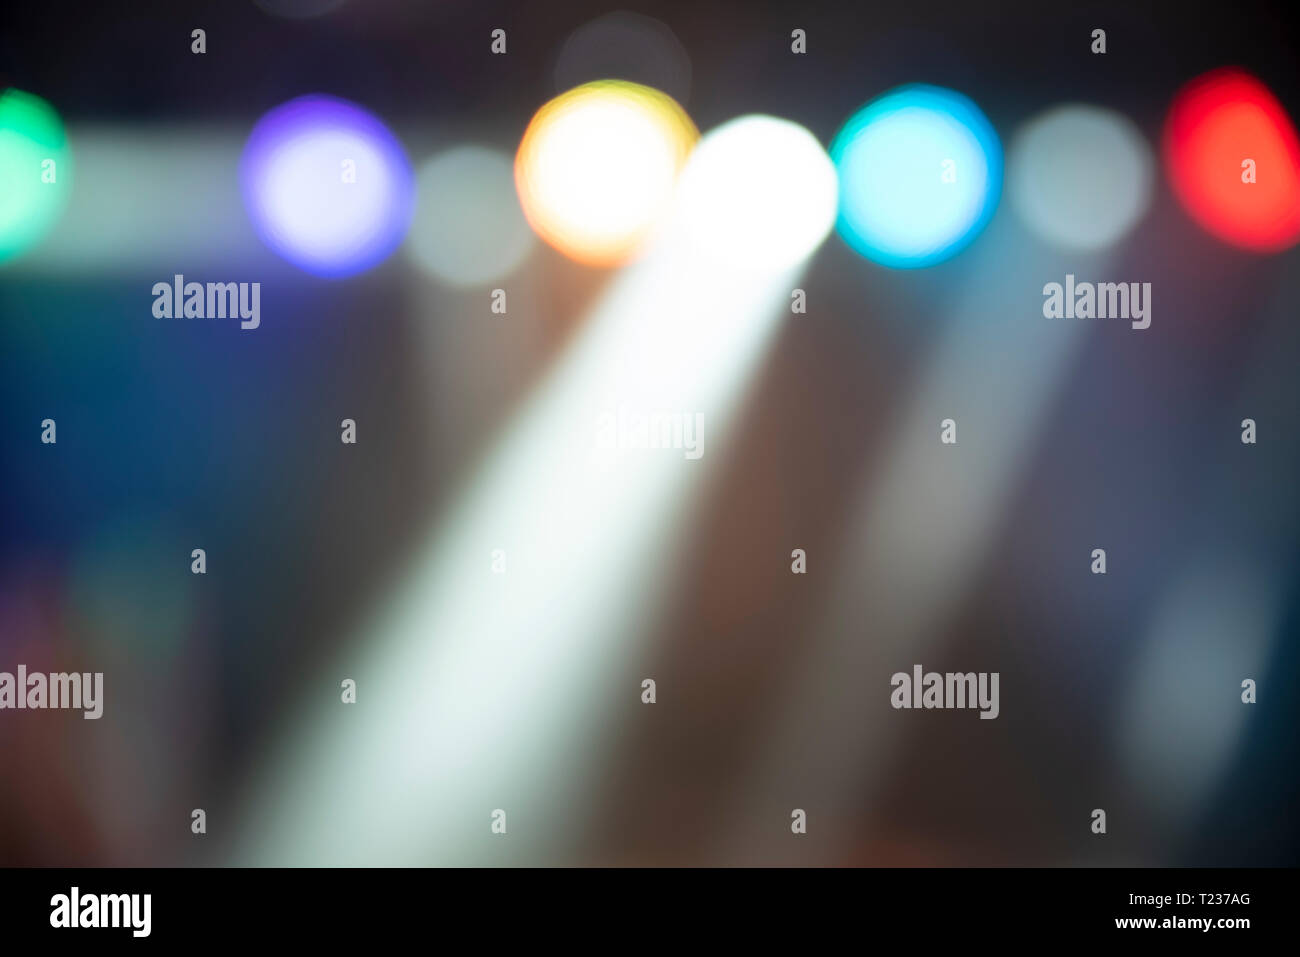 Abstract colorful defocused background, light spotlights, dance party Stock Photo